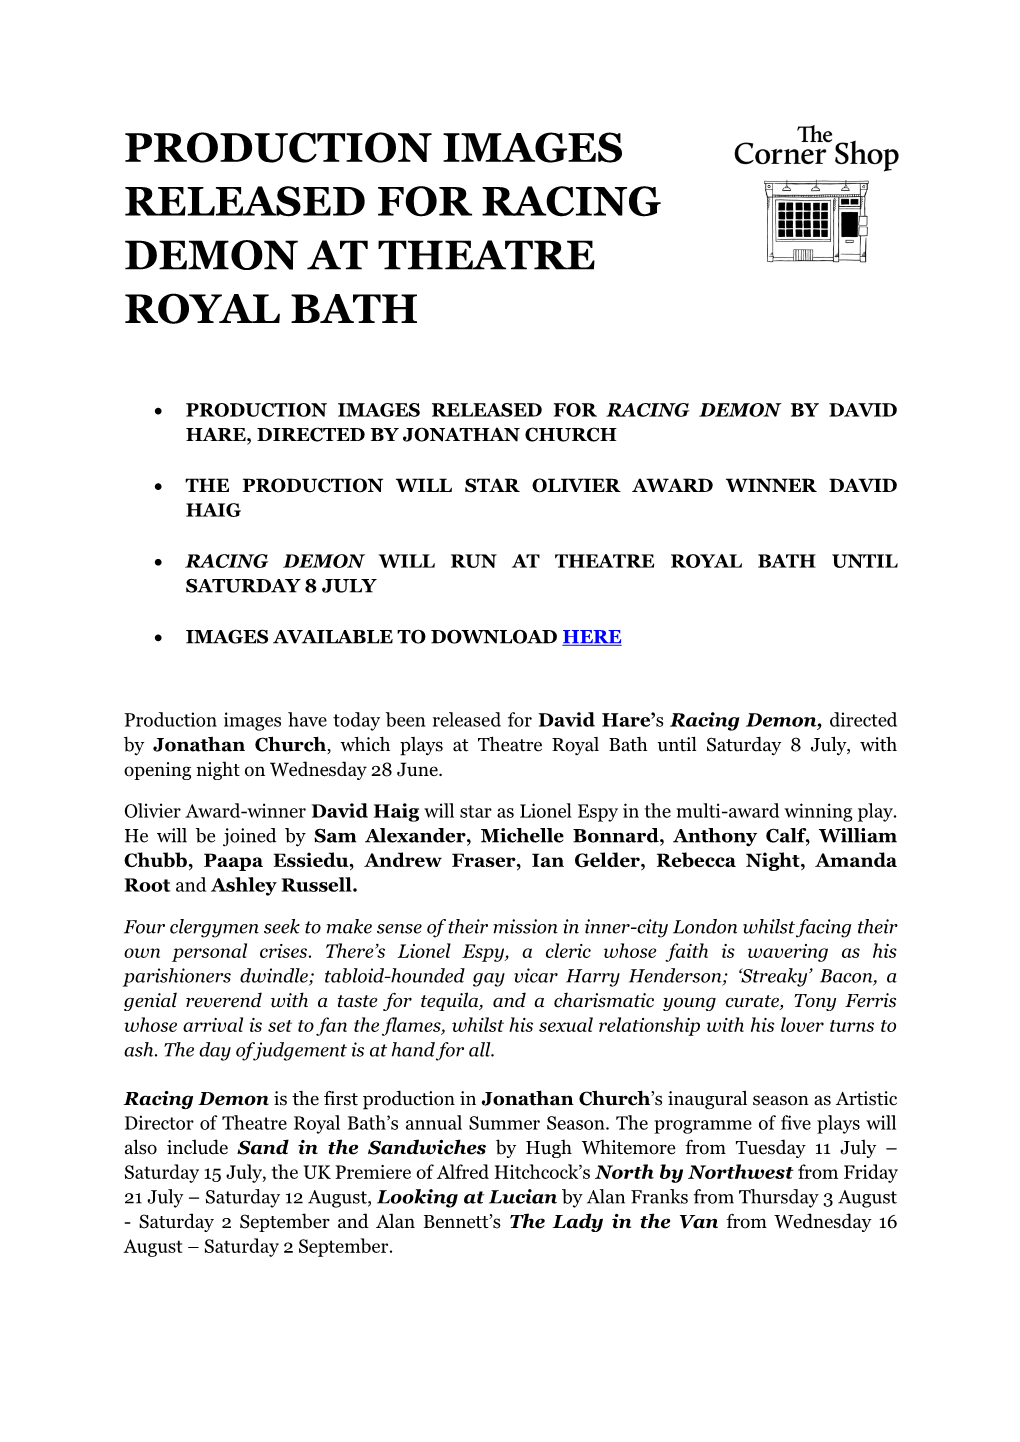 Production Images Released for Racing Demon at Theatre Royal Bath